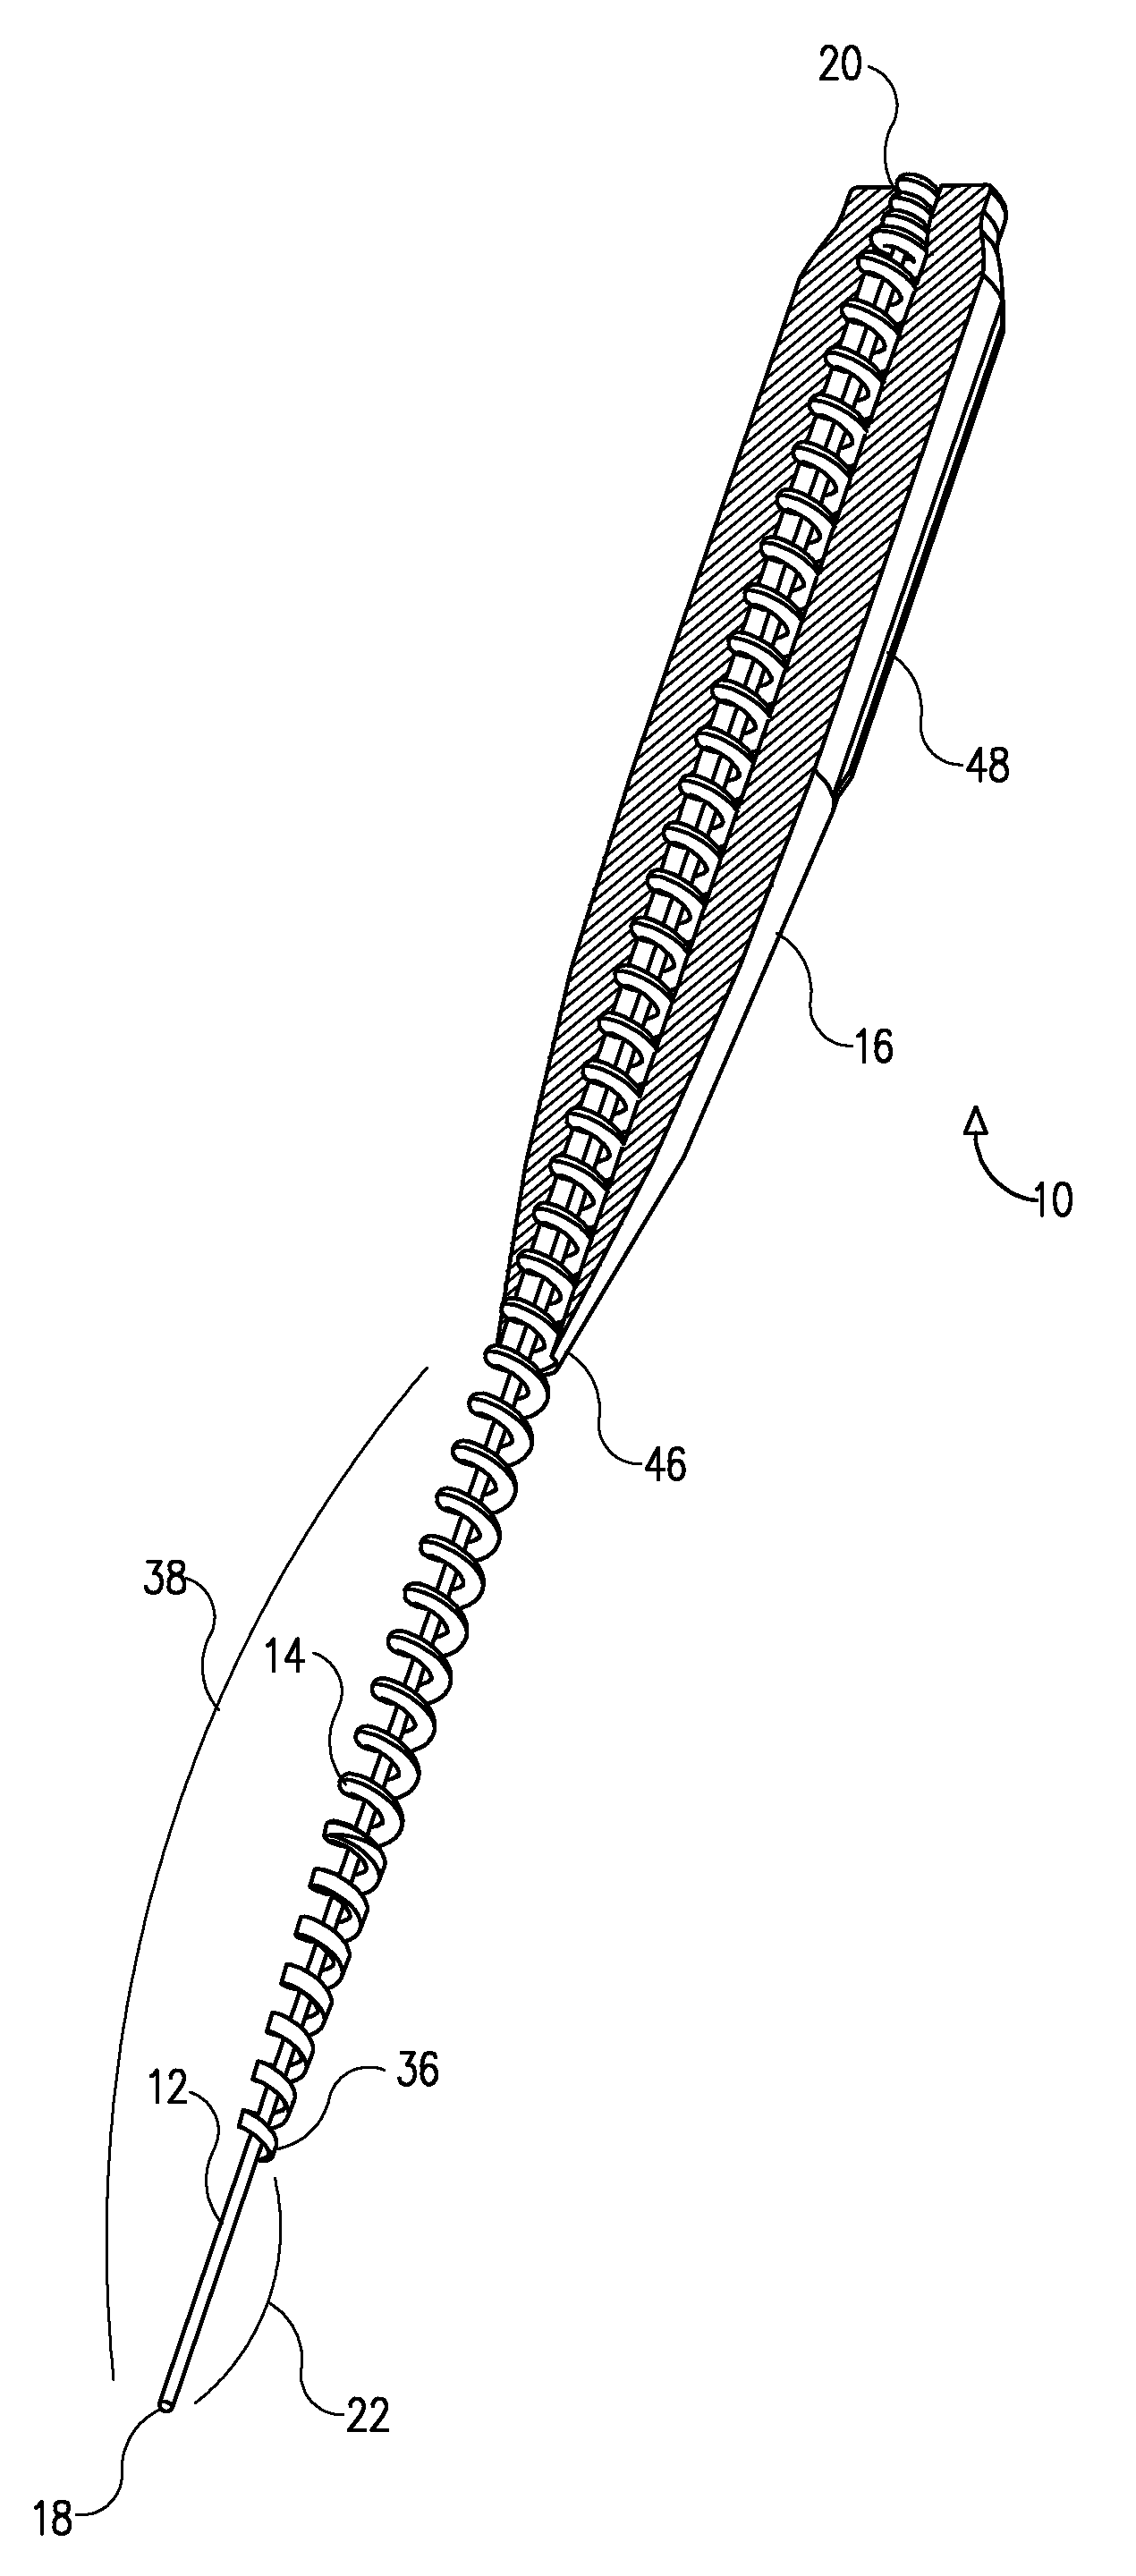 Rotary endodontic file with frictional grip